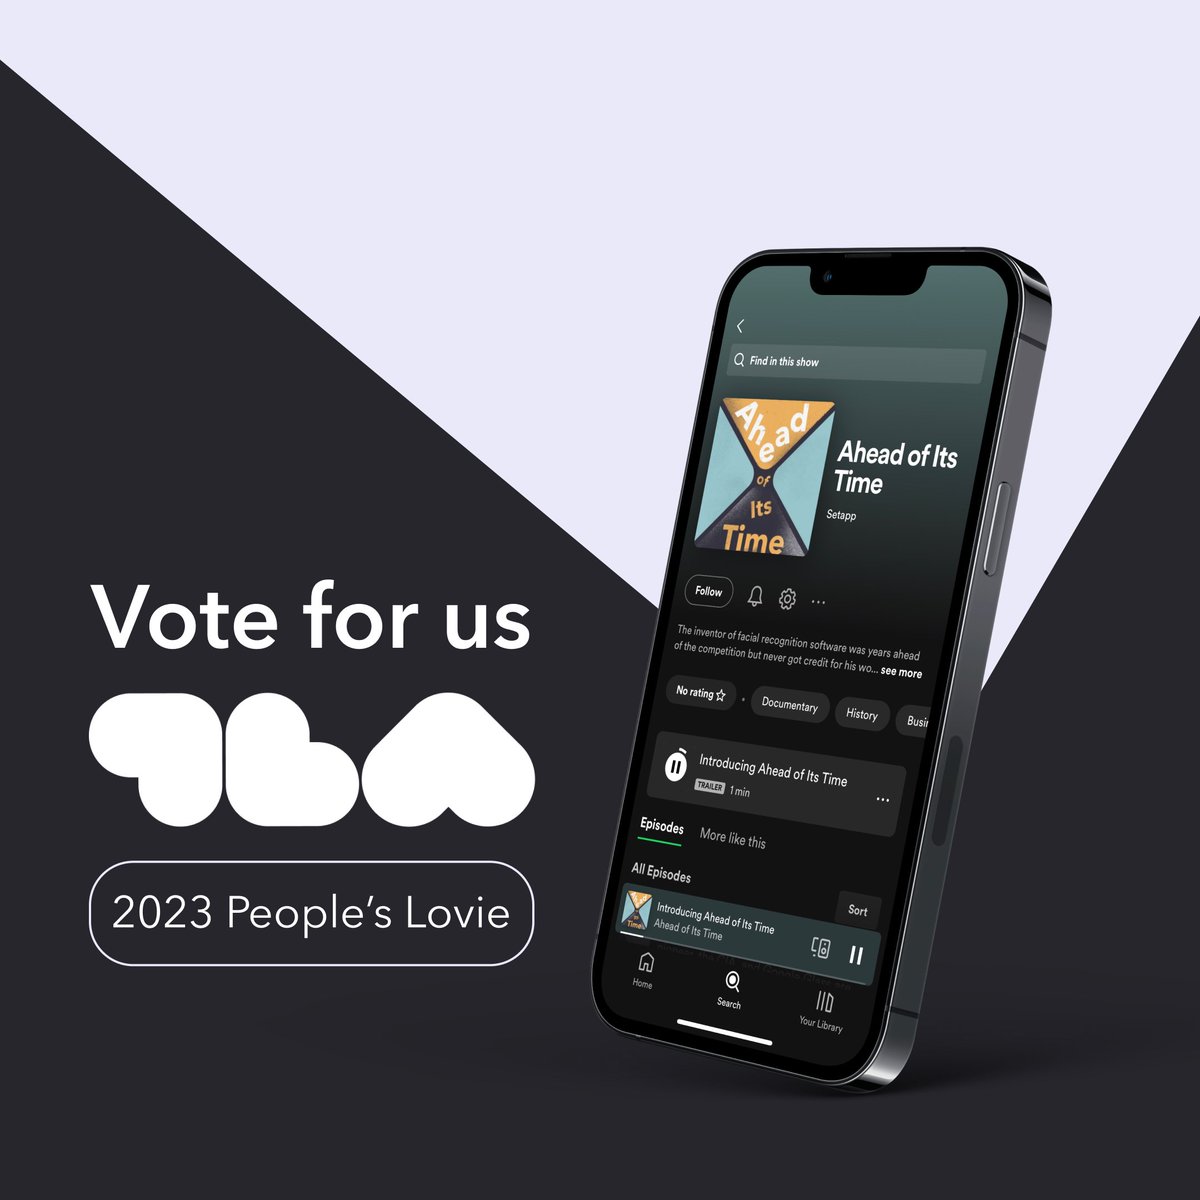 Support Setapp's podcast Ahead of Its Time (with @pacificcontent) in @lovieawards!❤️
 
Wi-Fi centered episode with guest @alexhaggiagdean is nominated in Best Guest category🤩
 
Vote here👉 vote.lovieawards.com/PublicVoting#/… 

#lovieawards